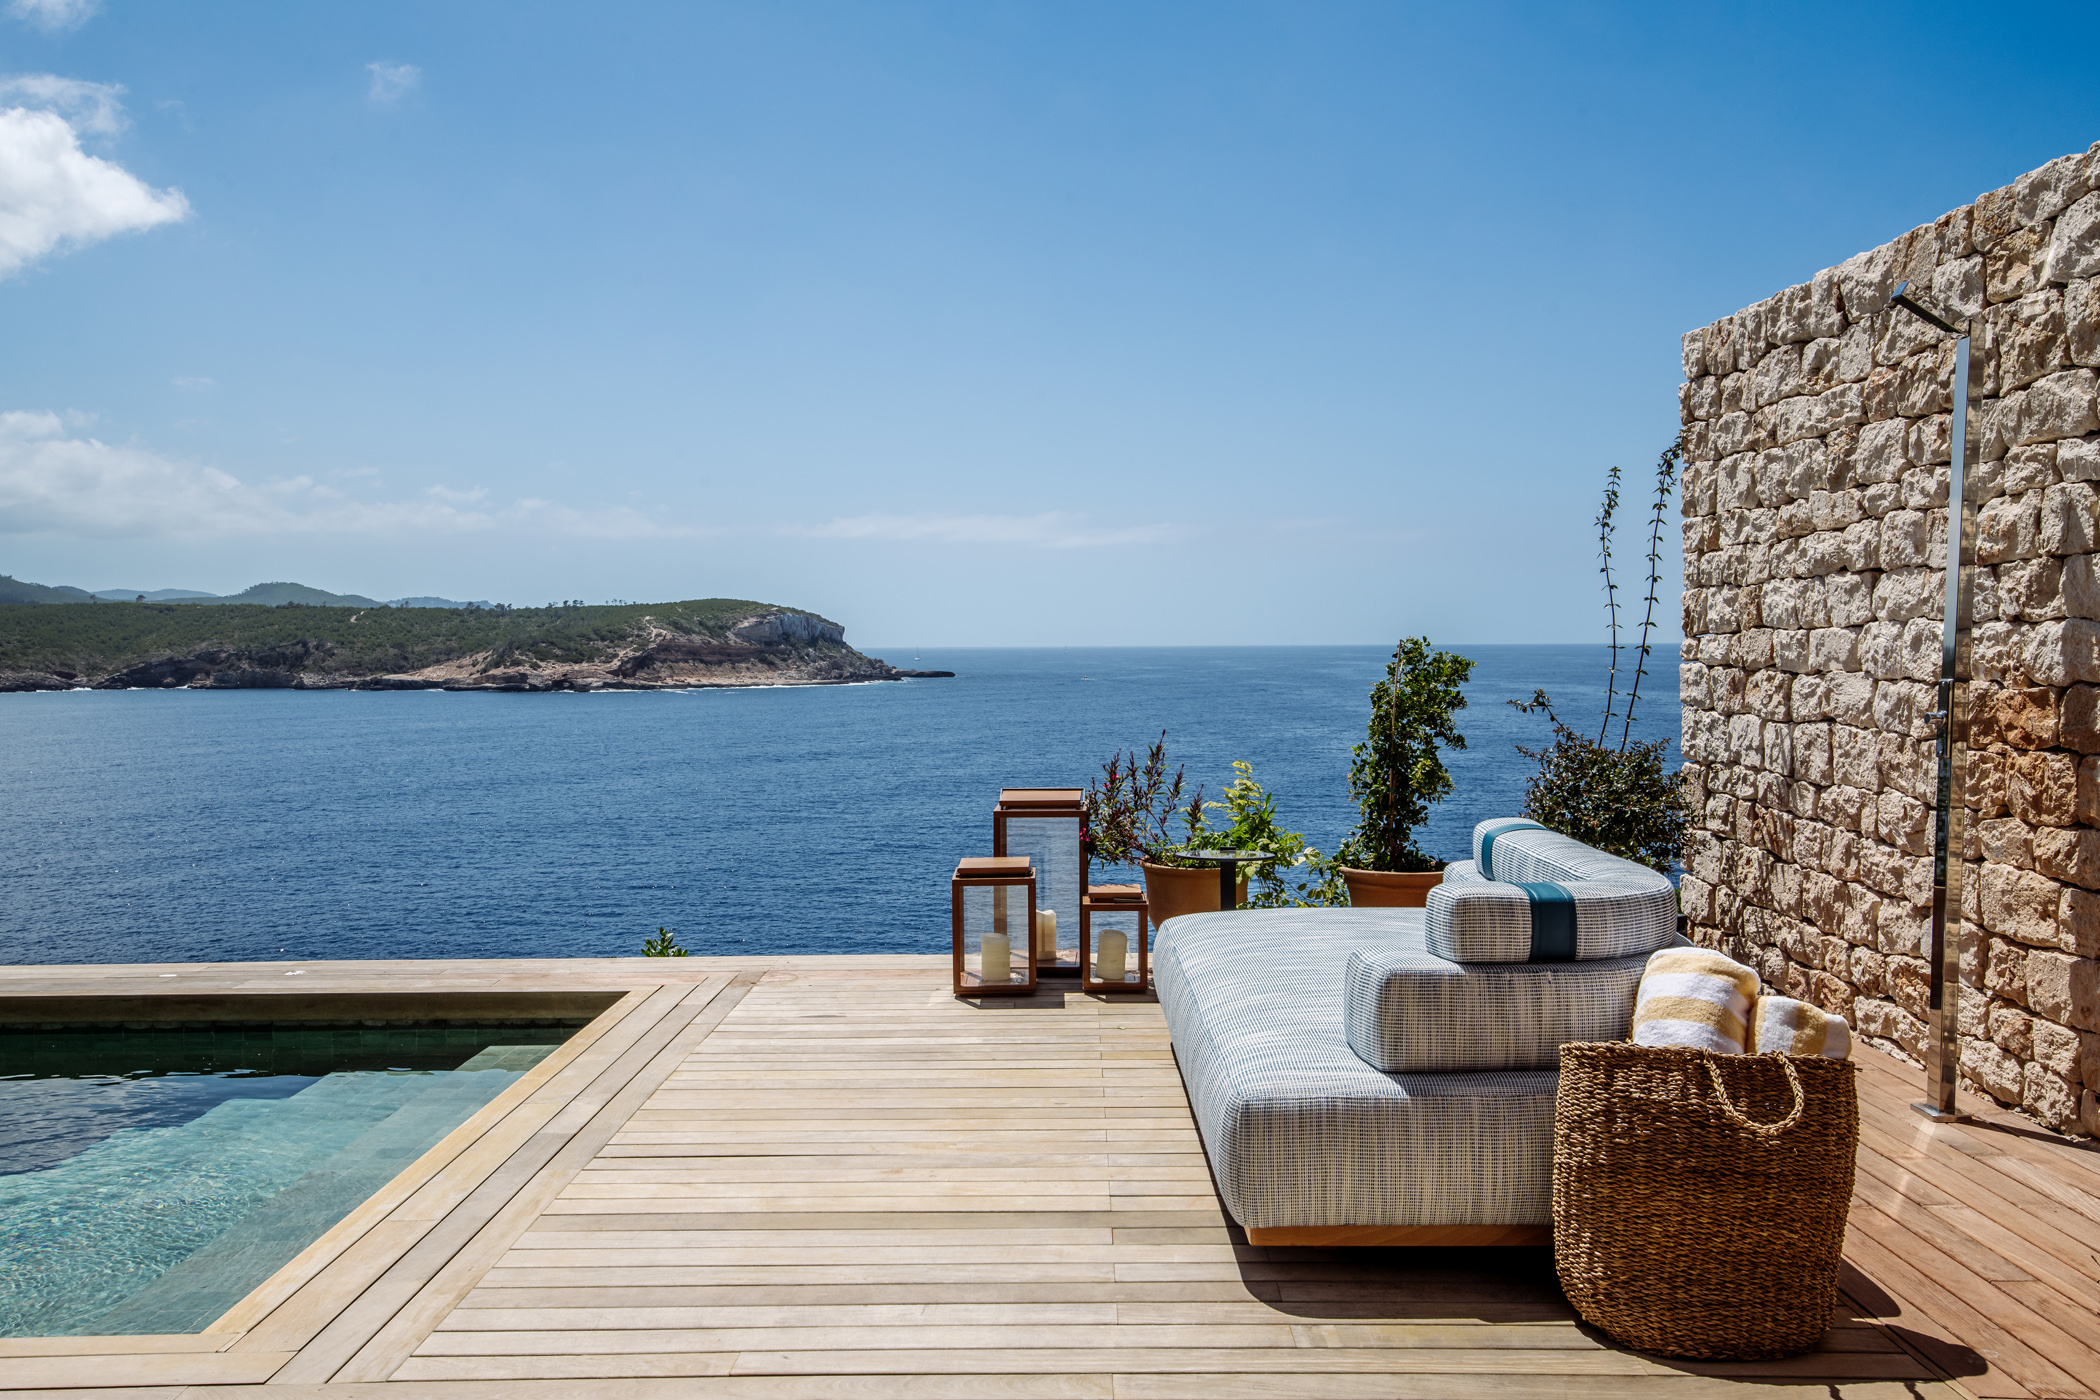 Pool and deck of a luxury rental villa overlooking the north east coast of Ibiza